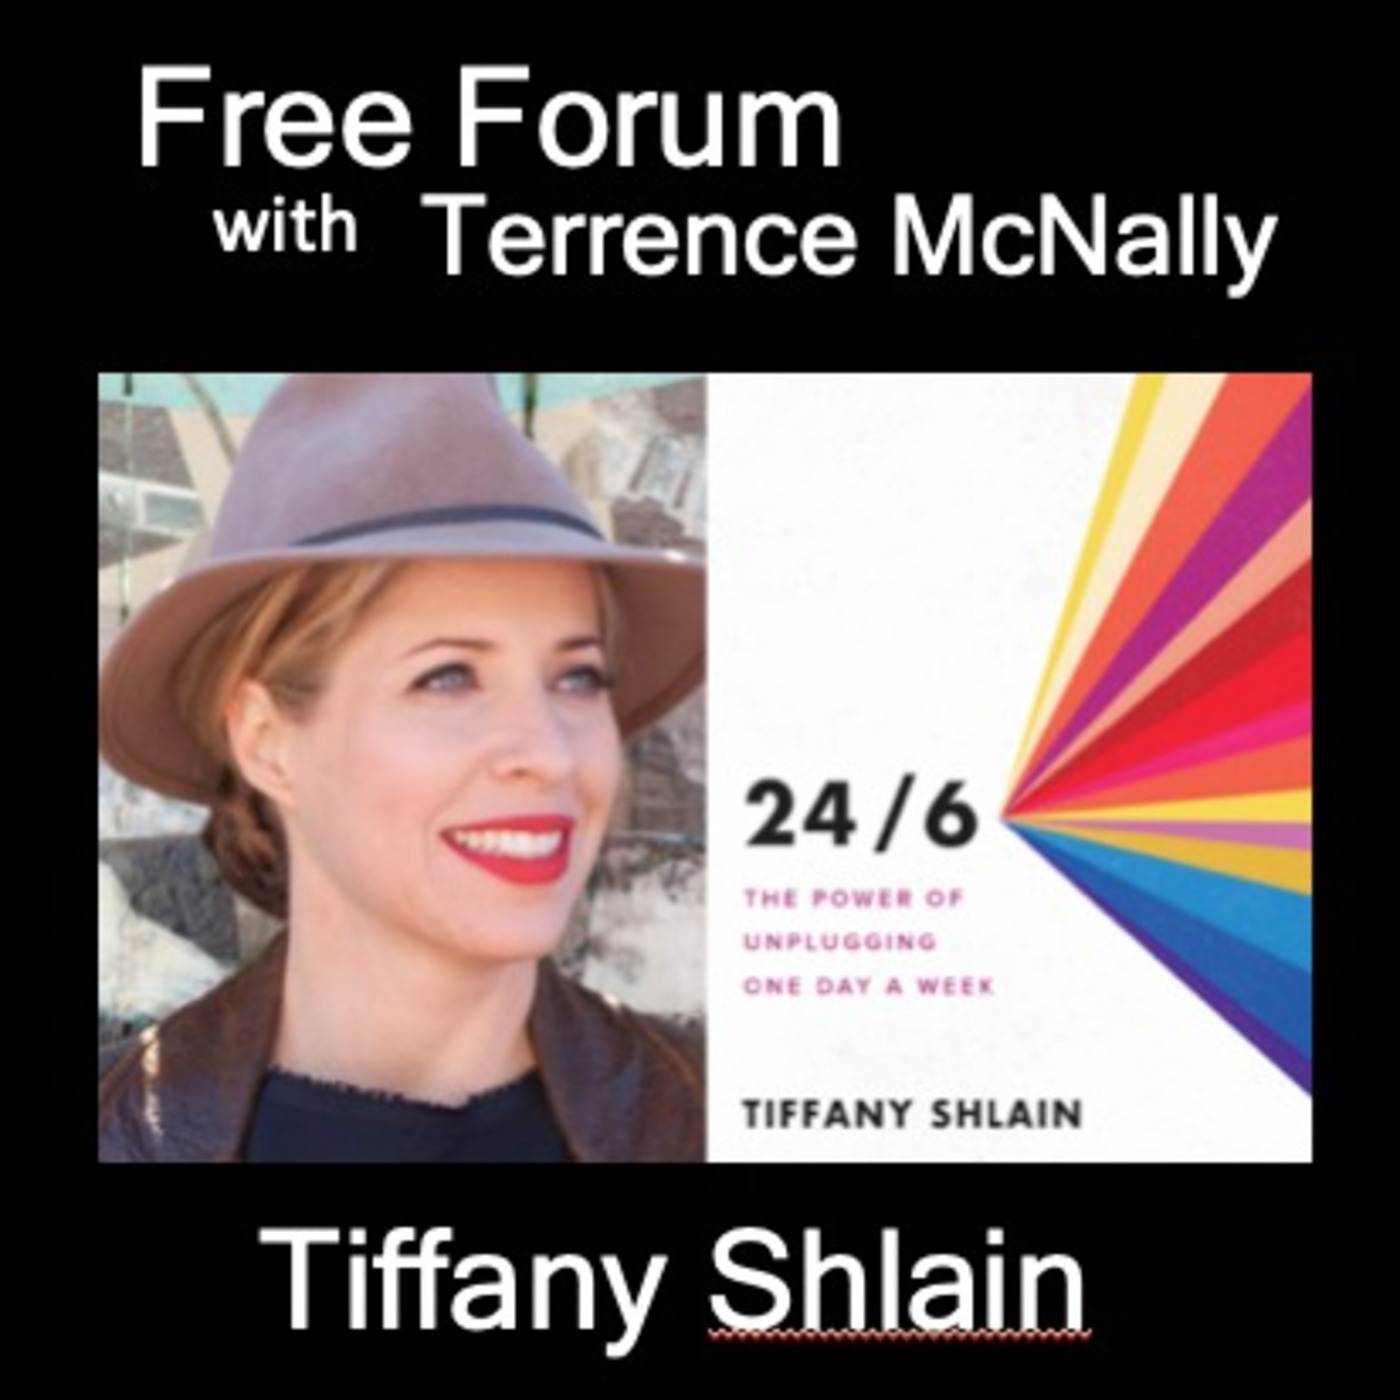 NEW: TIFFANY SHLAIN - 24/6: The Power of Unplugging One Day a Week